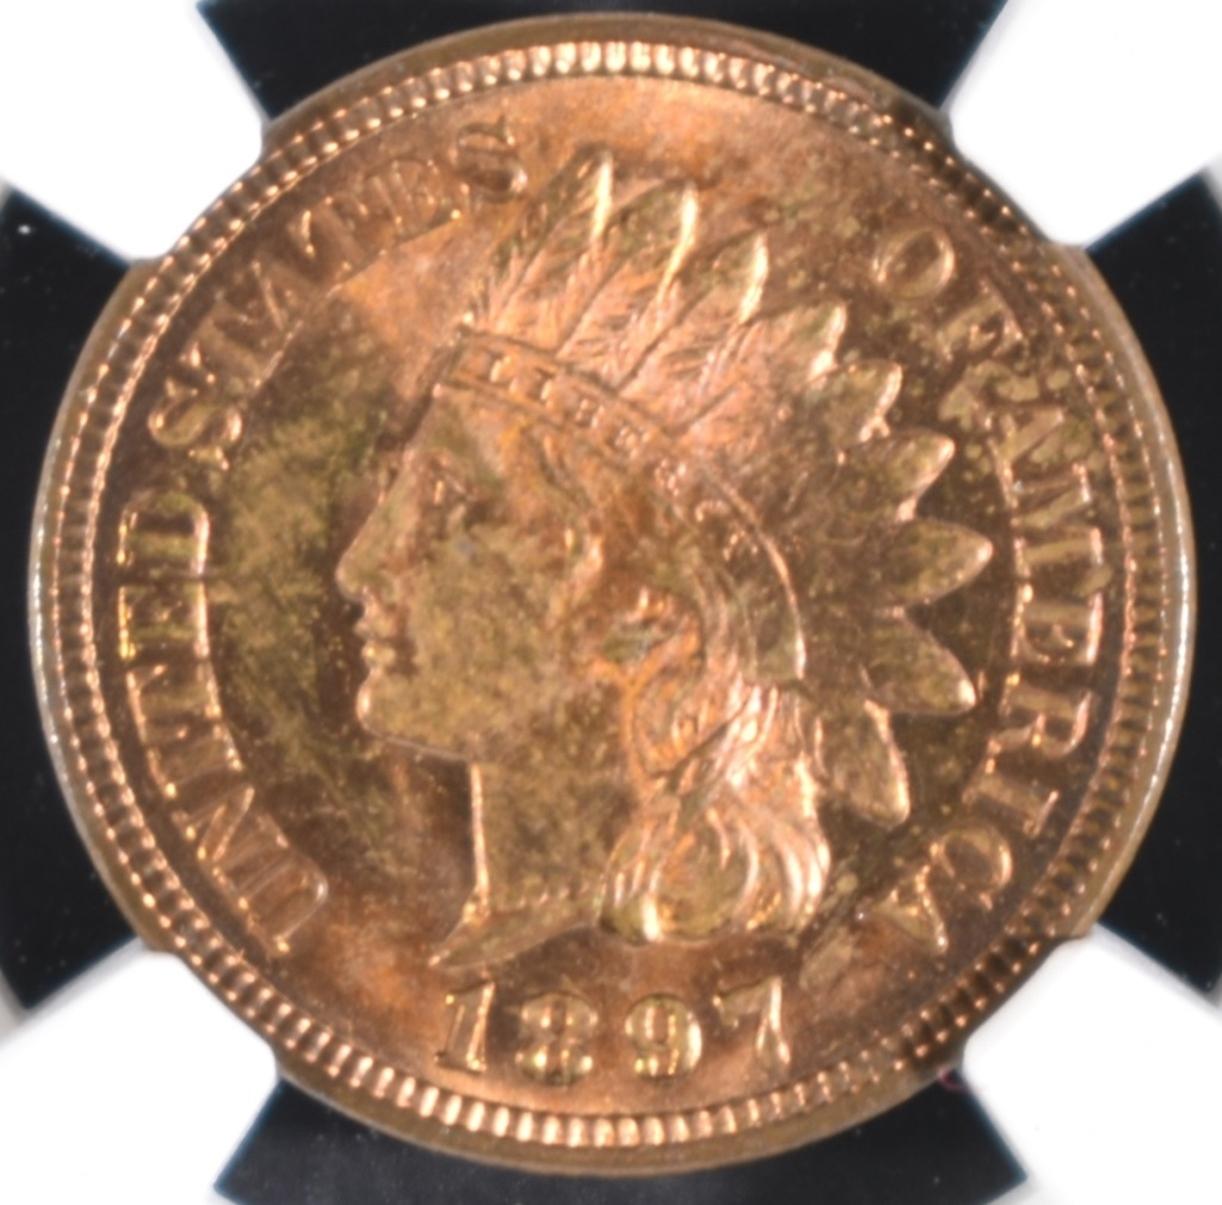 1897 INDIAN HEAD CENT, NGC MS-63 RB